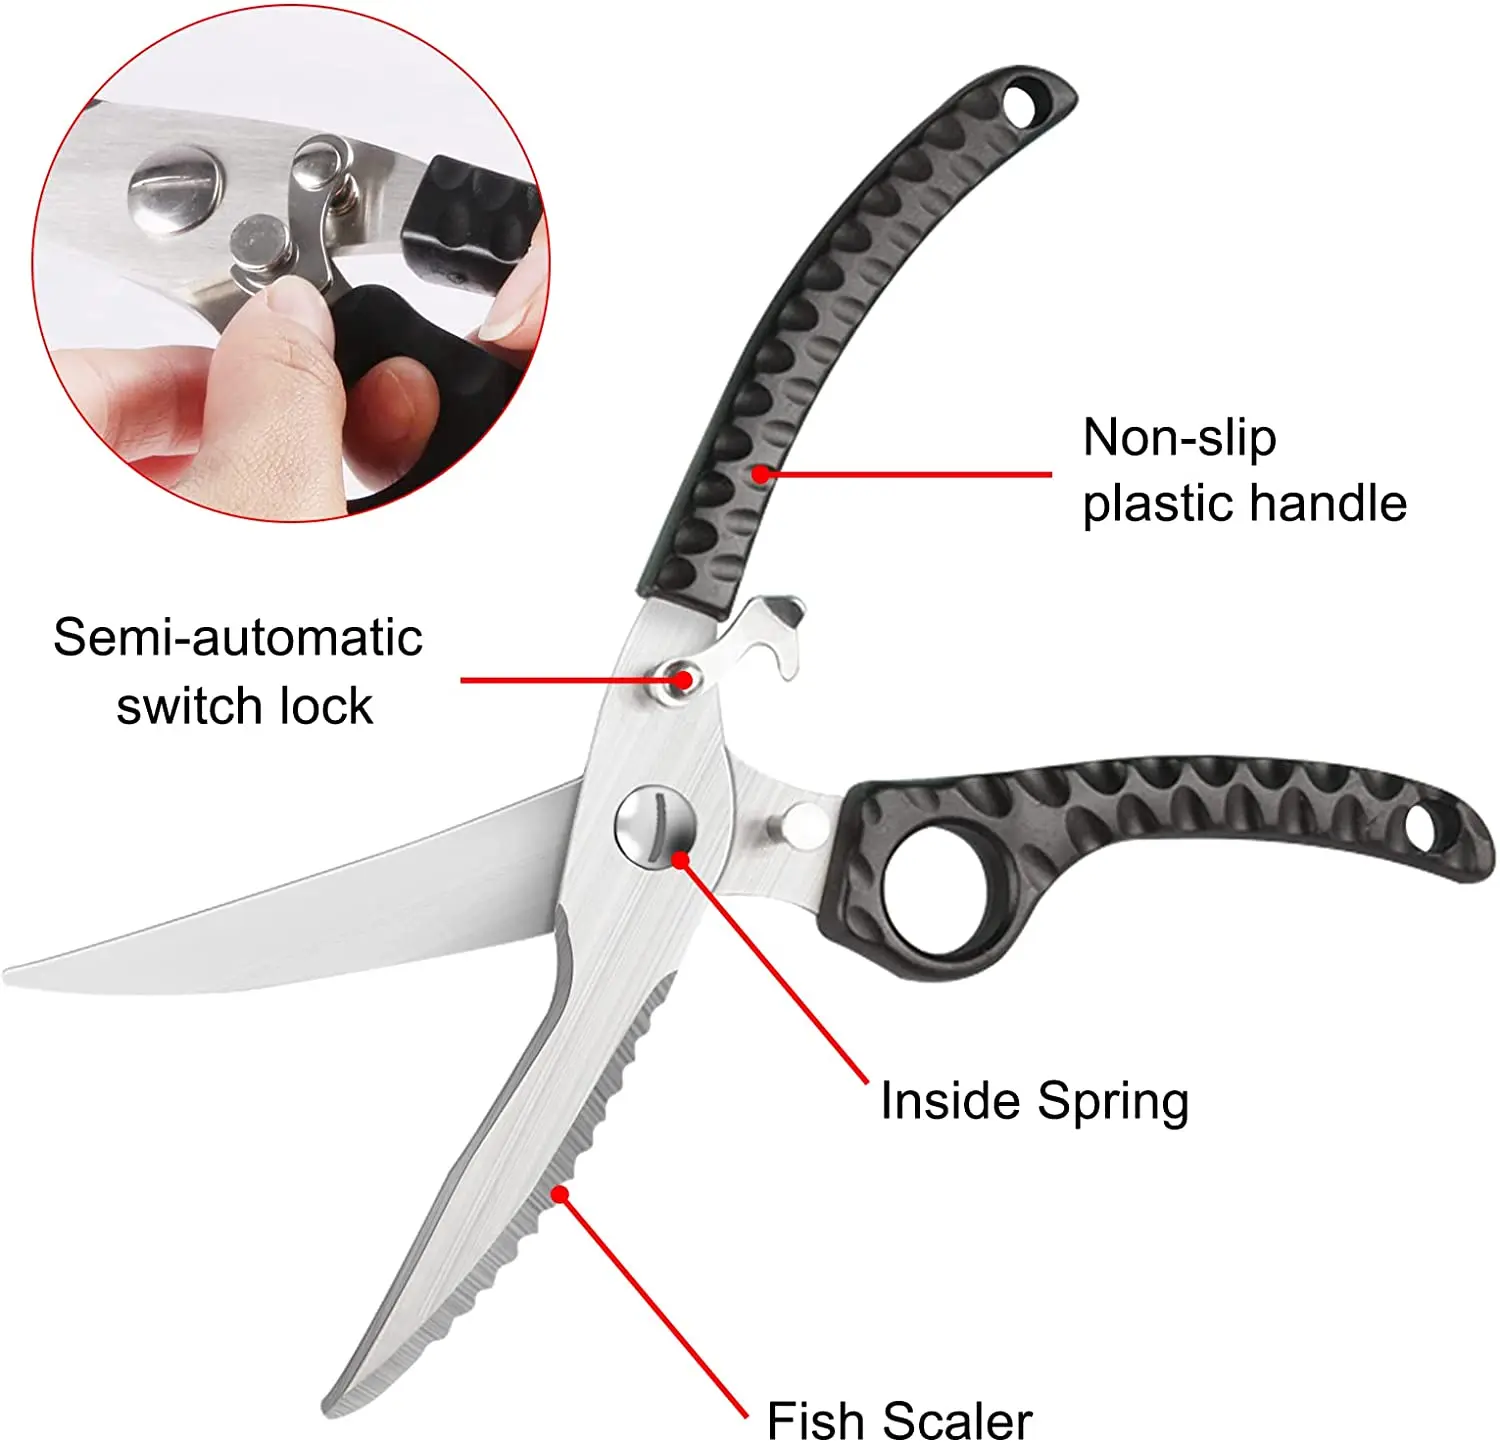 https://ae01.alicdn.com/kf/S9d8cb93bef4f466bb58b845876595c4eP/Heavy-Duty-Kitchen-Scissors-Sharp-Cooking-Scissors-Stainless-Steel-Poultry-Shears-with-Safety-Lock-and-Anti.jpg